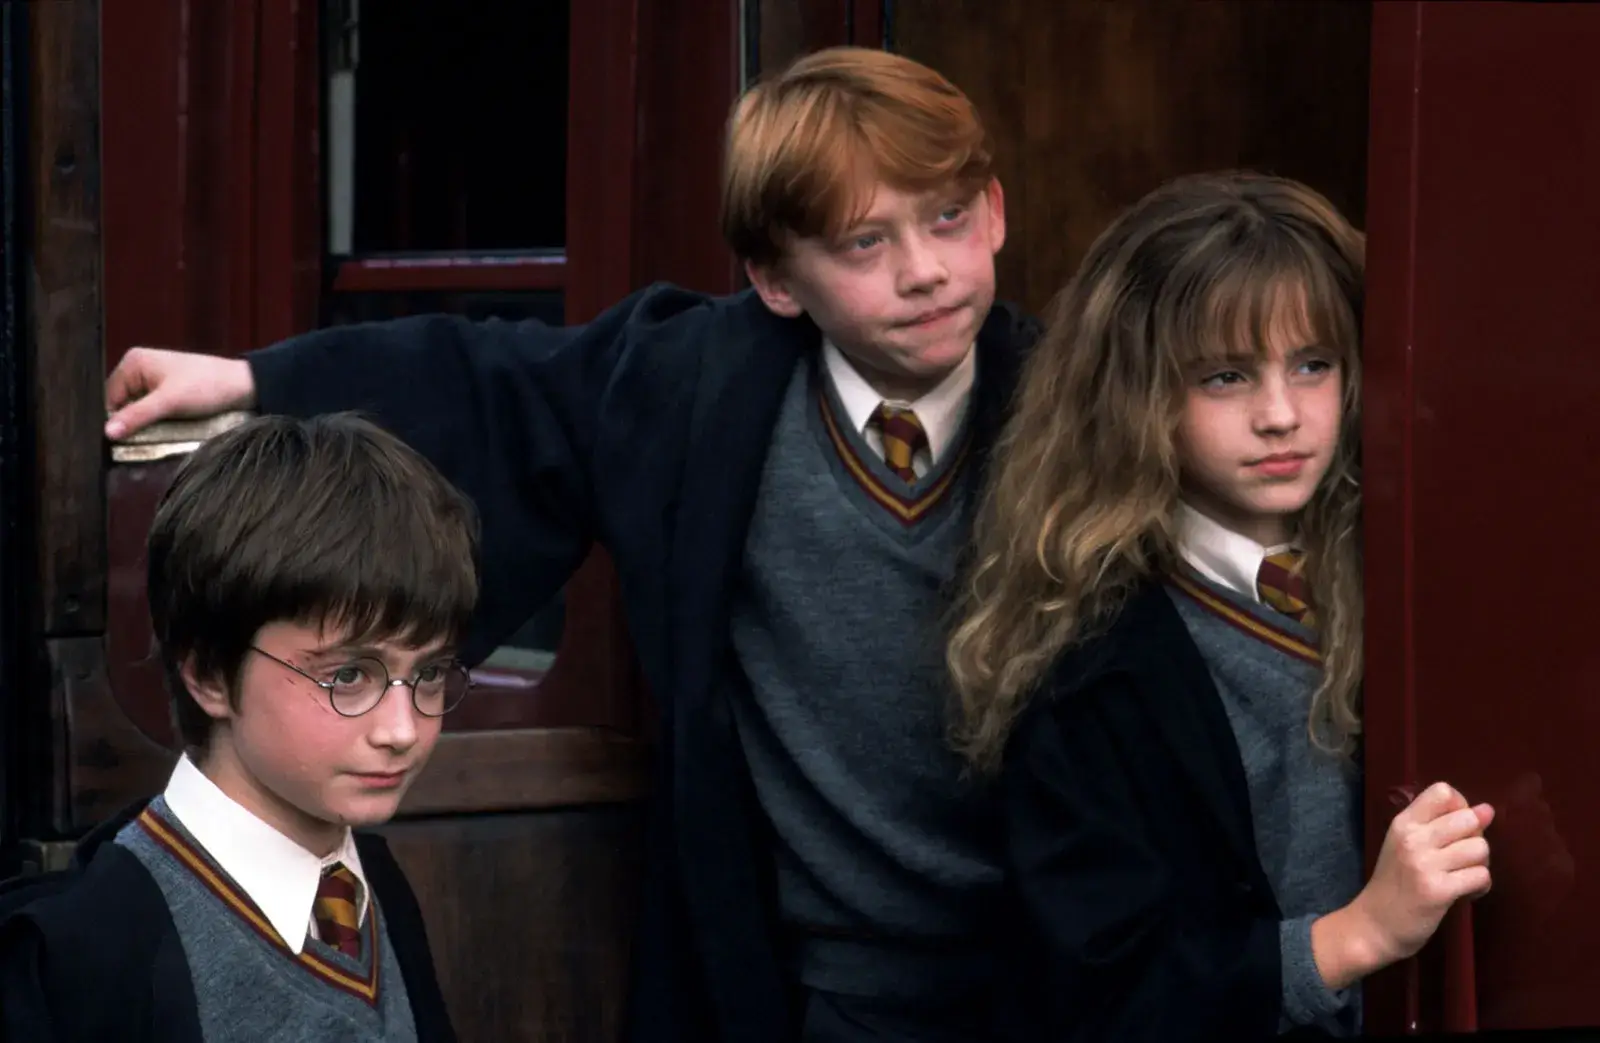 Primary trio of the harry potter films